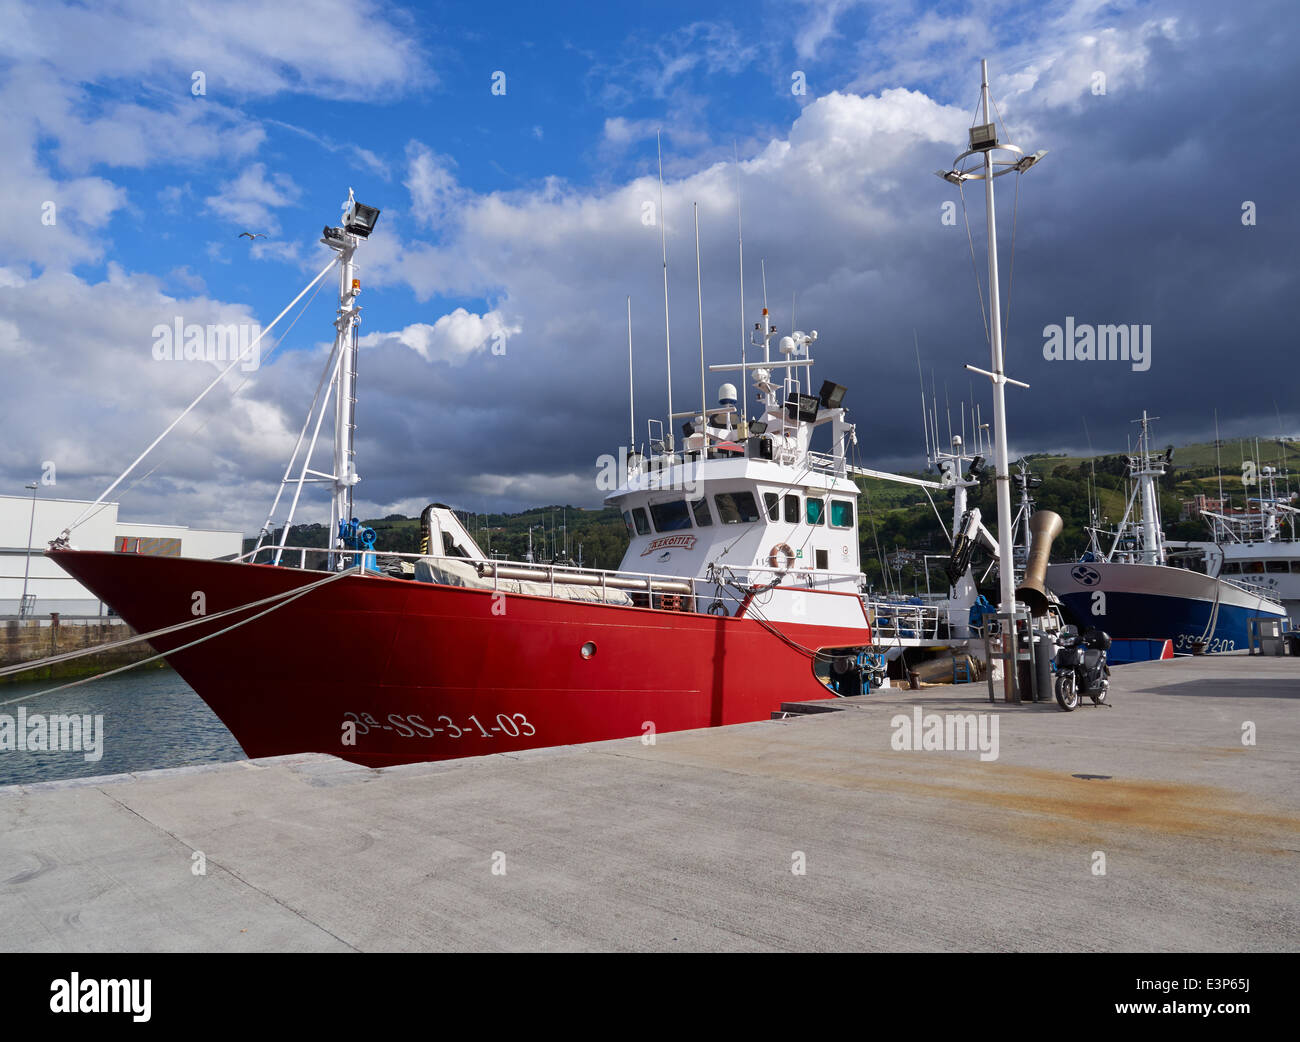 Fishing vessel in Getaria, Gipuzkoa, Basque Country Spain. A fishing trawler prepares to leave the busy commercial fishing port. Stock Photo